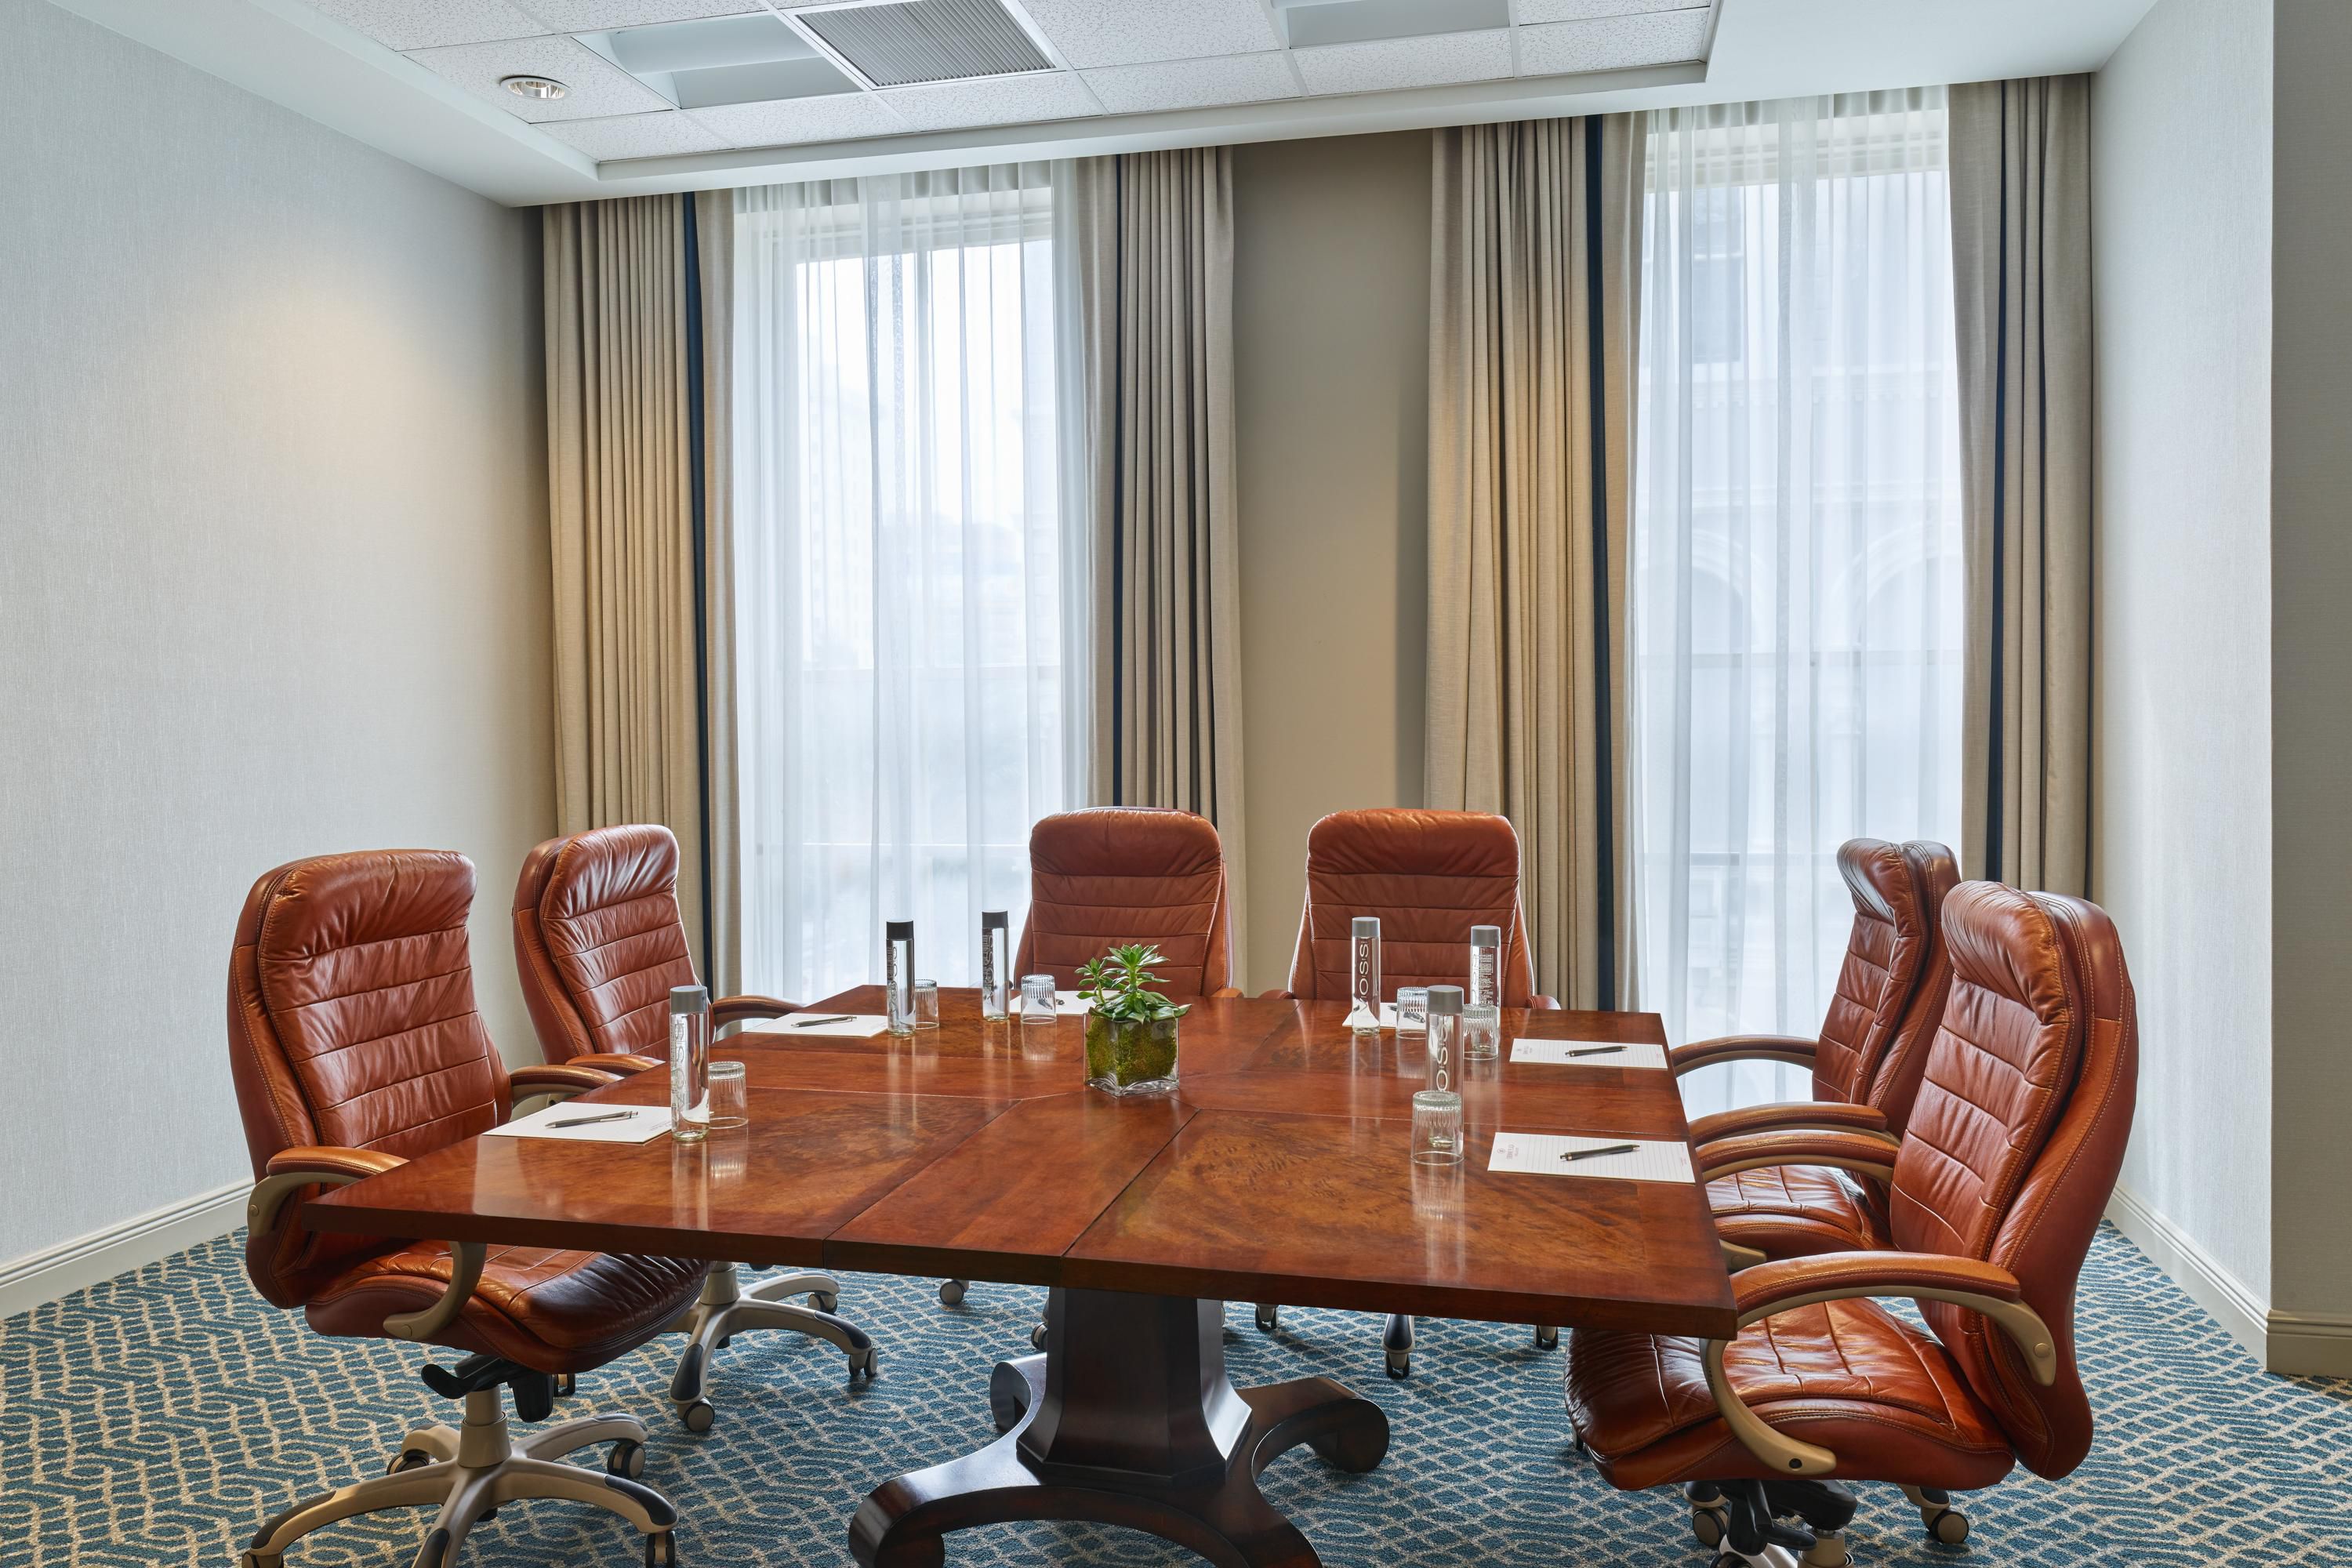 Conti Boardroom is ideal for your meeting for up to 10 attendees.